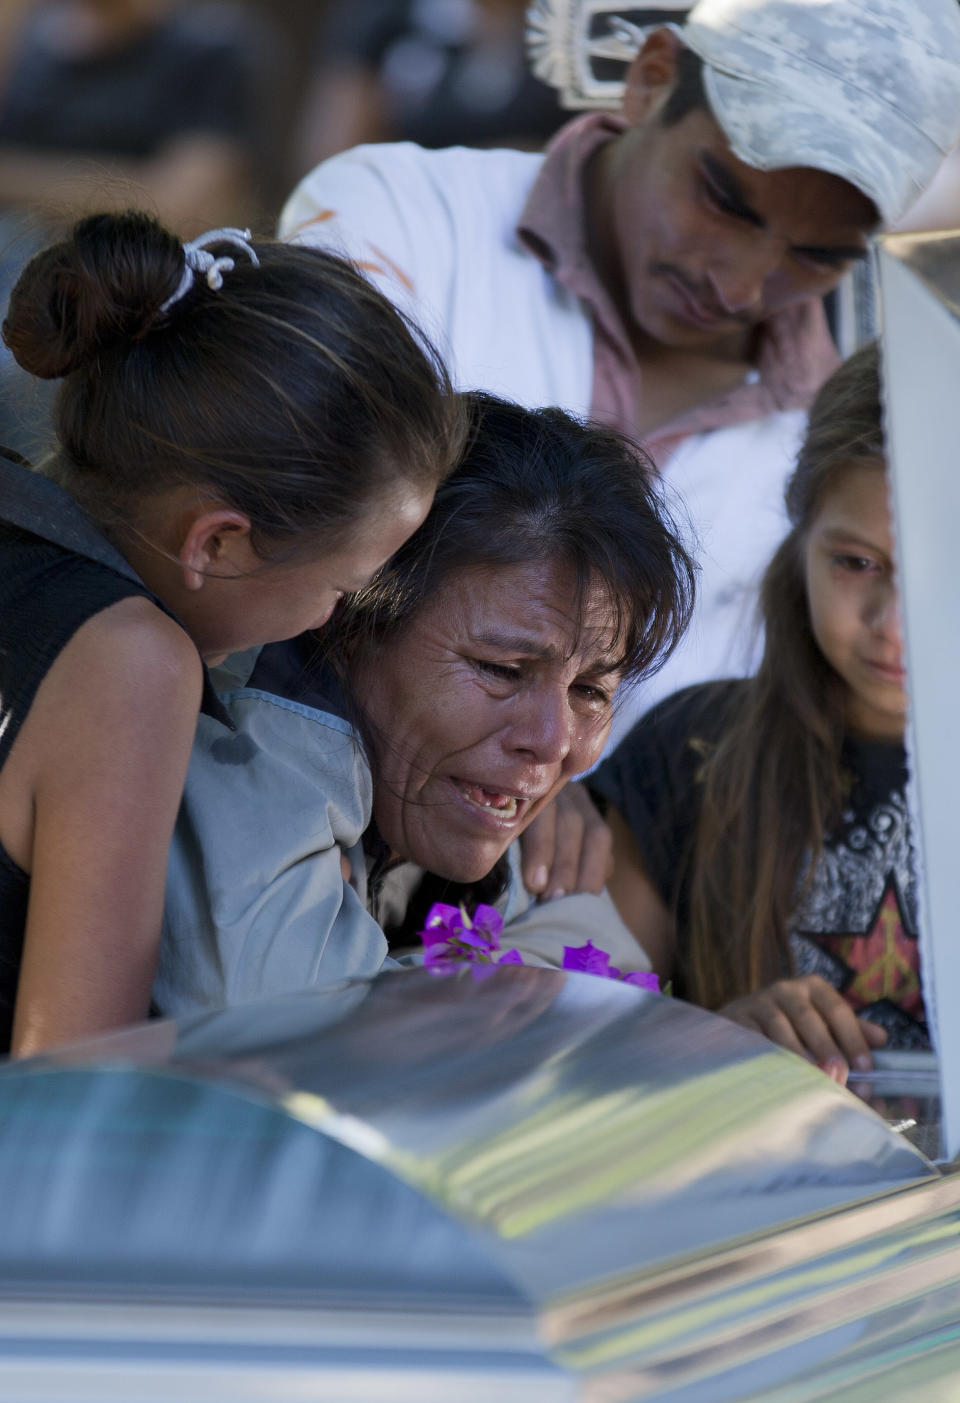 ADDS CIRCUMSTANCE OF DEATH - Juana Perez cries beside the coffin of her son Rodrigo Benitez, 25, killed in the recent fighting in Antunez, Mexico, Tuesday, Jan. 14, 2014. The government moved in to quell violence between vigilantes and a drug cartel, and witnesses say several unarmed civilians were killed in an early Tuesday confrontation. According to family members at the funeral, Benitez died in the crossfire between self-defense members and soldiers after he and other townspeople were called to meet a convoy of soldiers who they were told were coming to disarm the self-defense group. (AP Photo/Eduardo Verdugo)